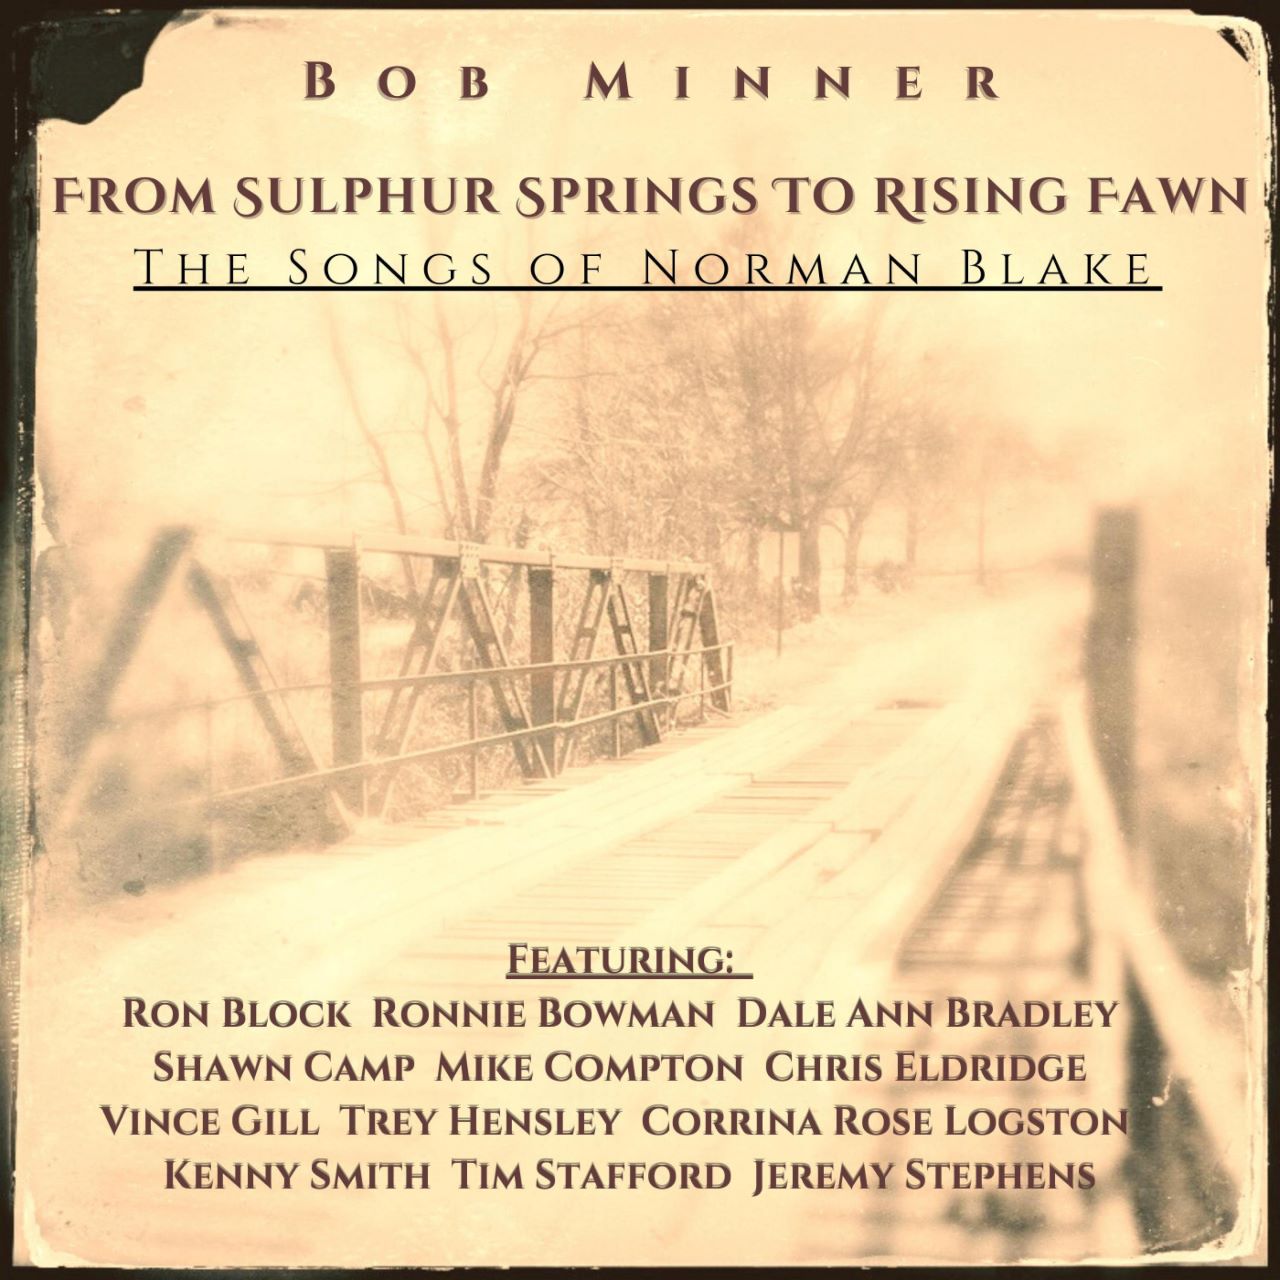 Bob Minner - From Suplhur Springs To Rising Fawn cover album